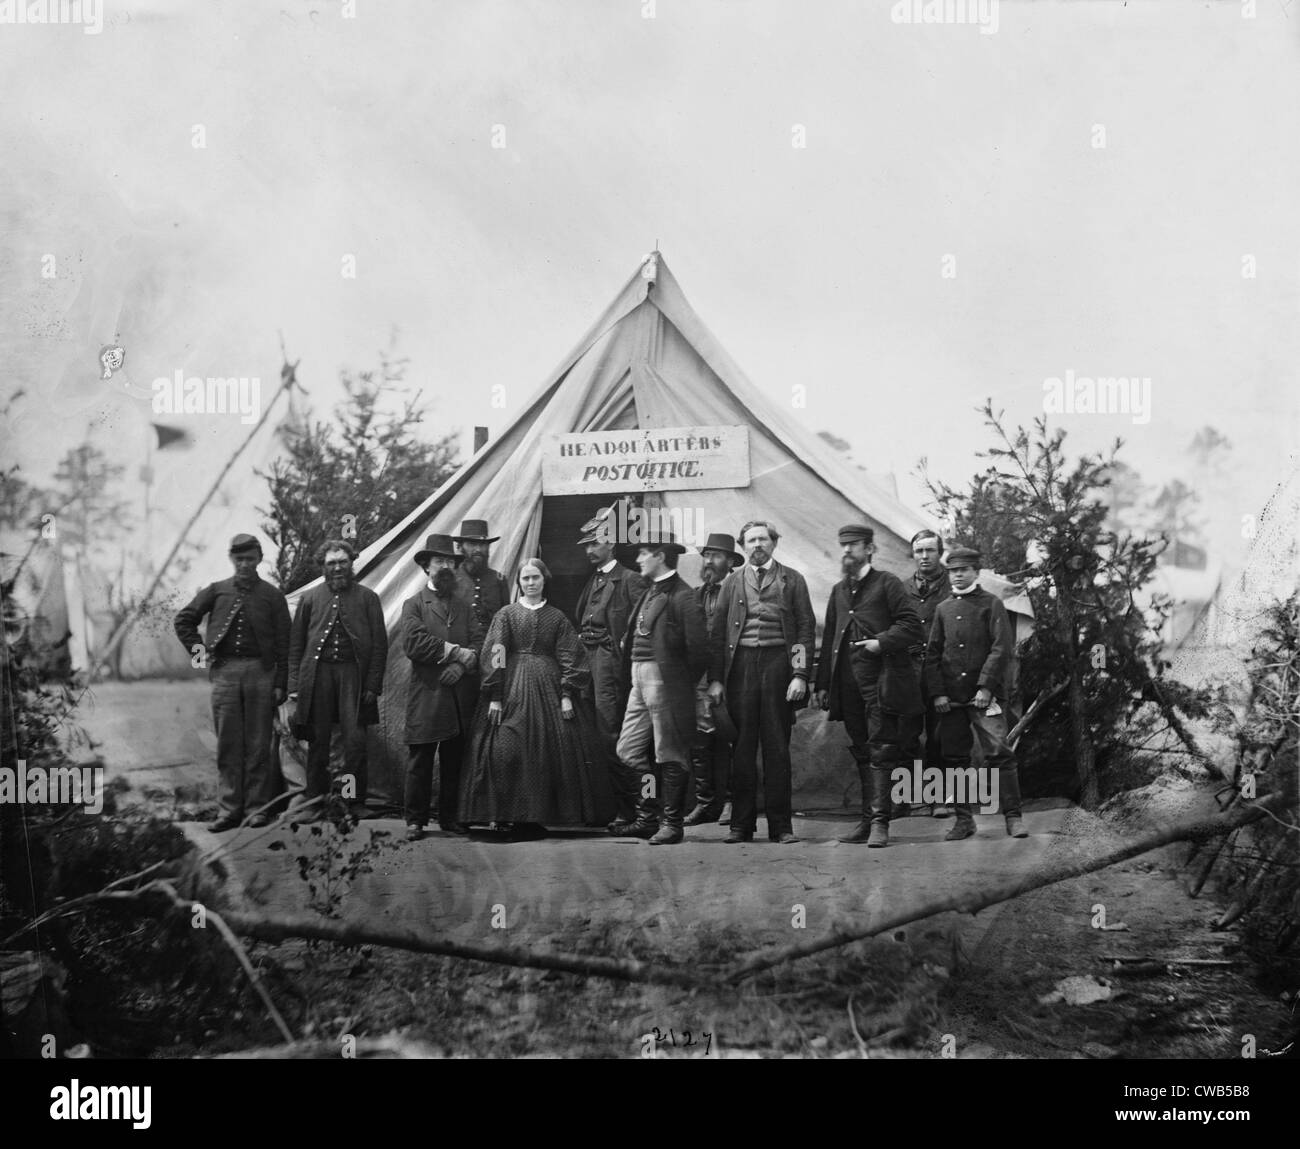 The Civil War, group in front of post office tent at Army of the Potomac headquarters, Falmouth, Virginia, photograph by Stock Photo